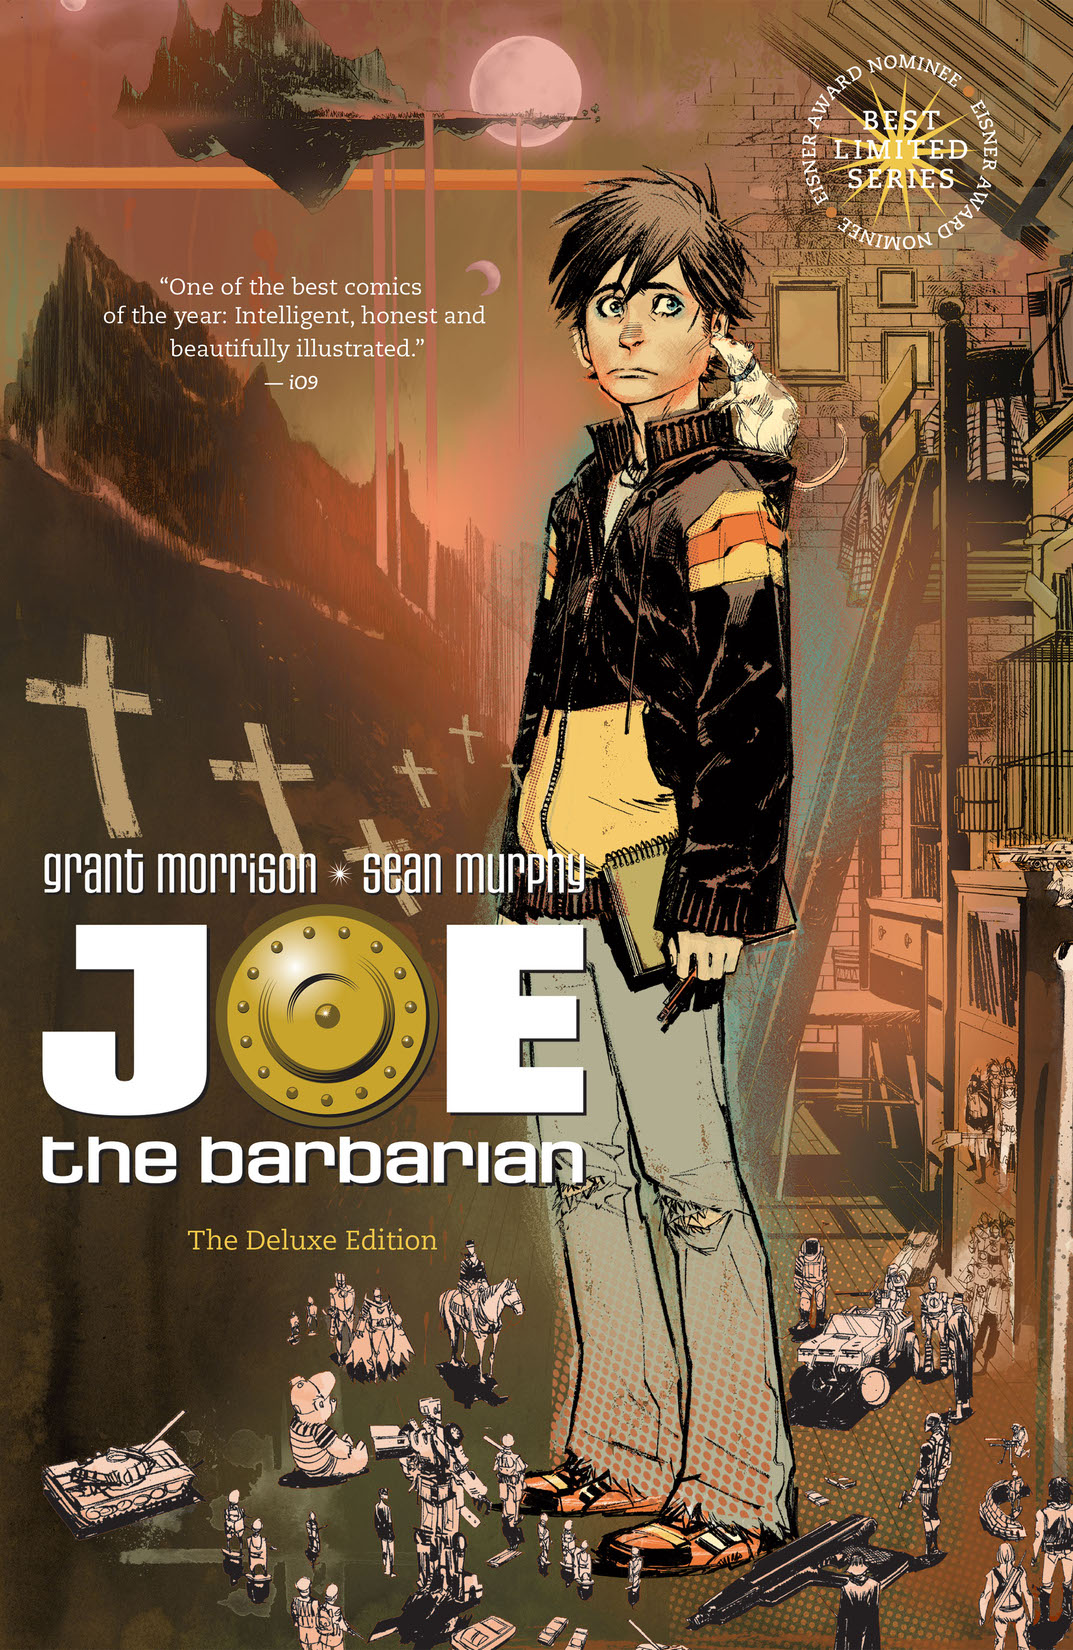 Joe the Barbarian Deluxe Edition preview images